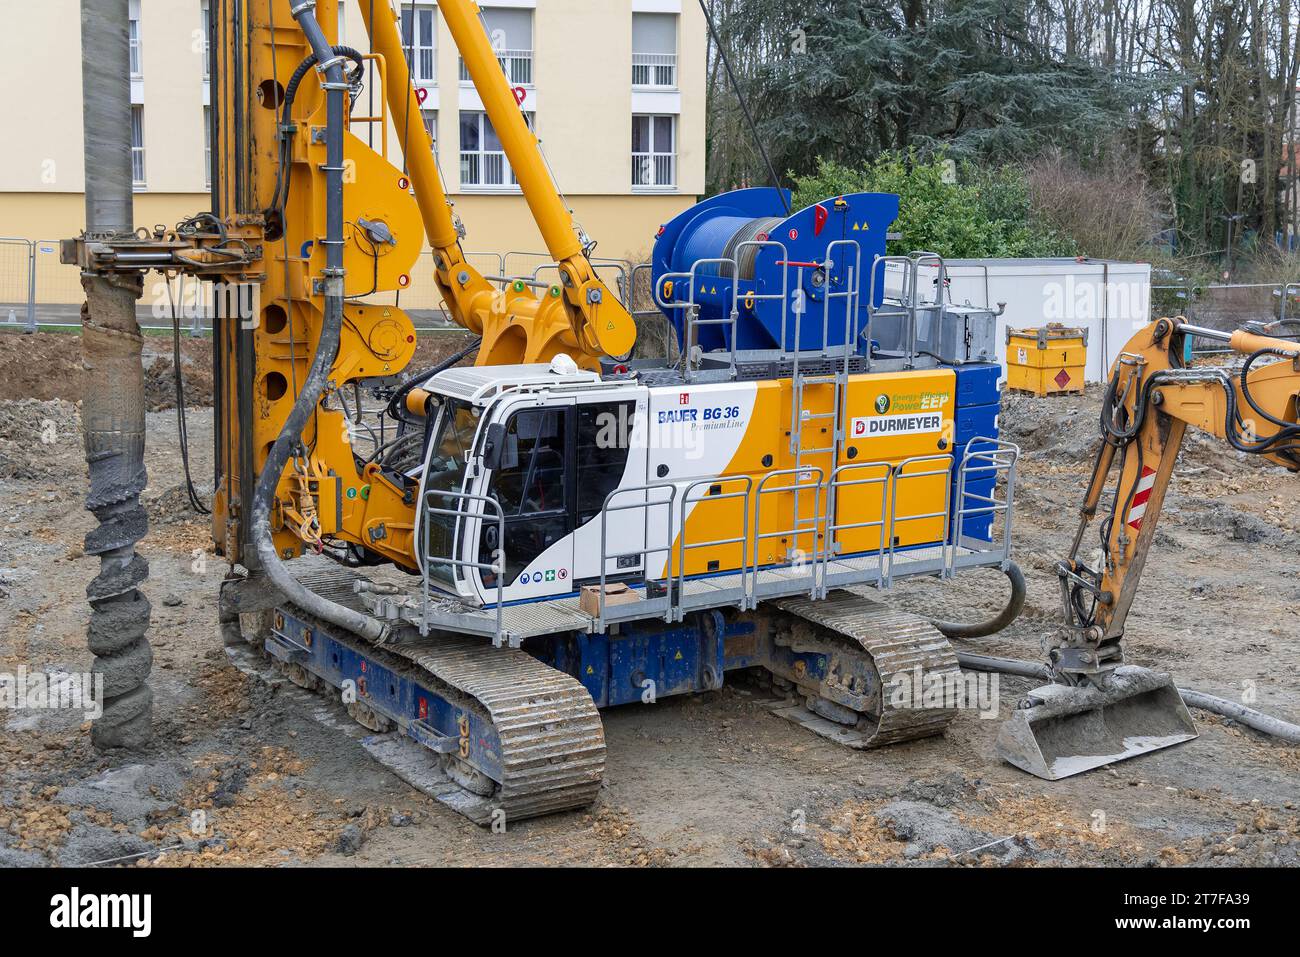 Metz, France - Yellow, white and blue drilling rig Bauer BG 36 on construction site. Stock Photo